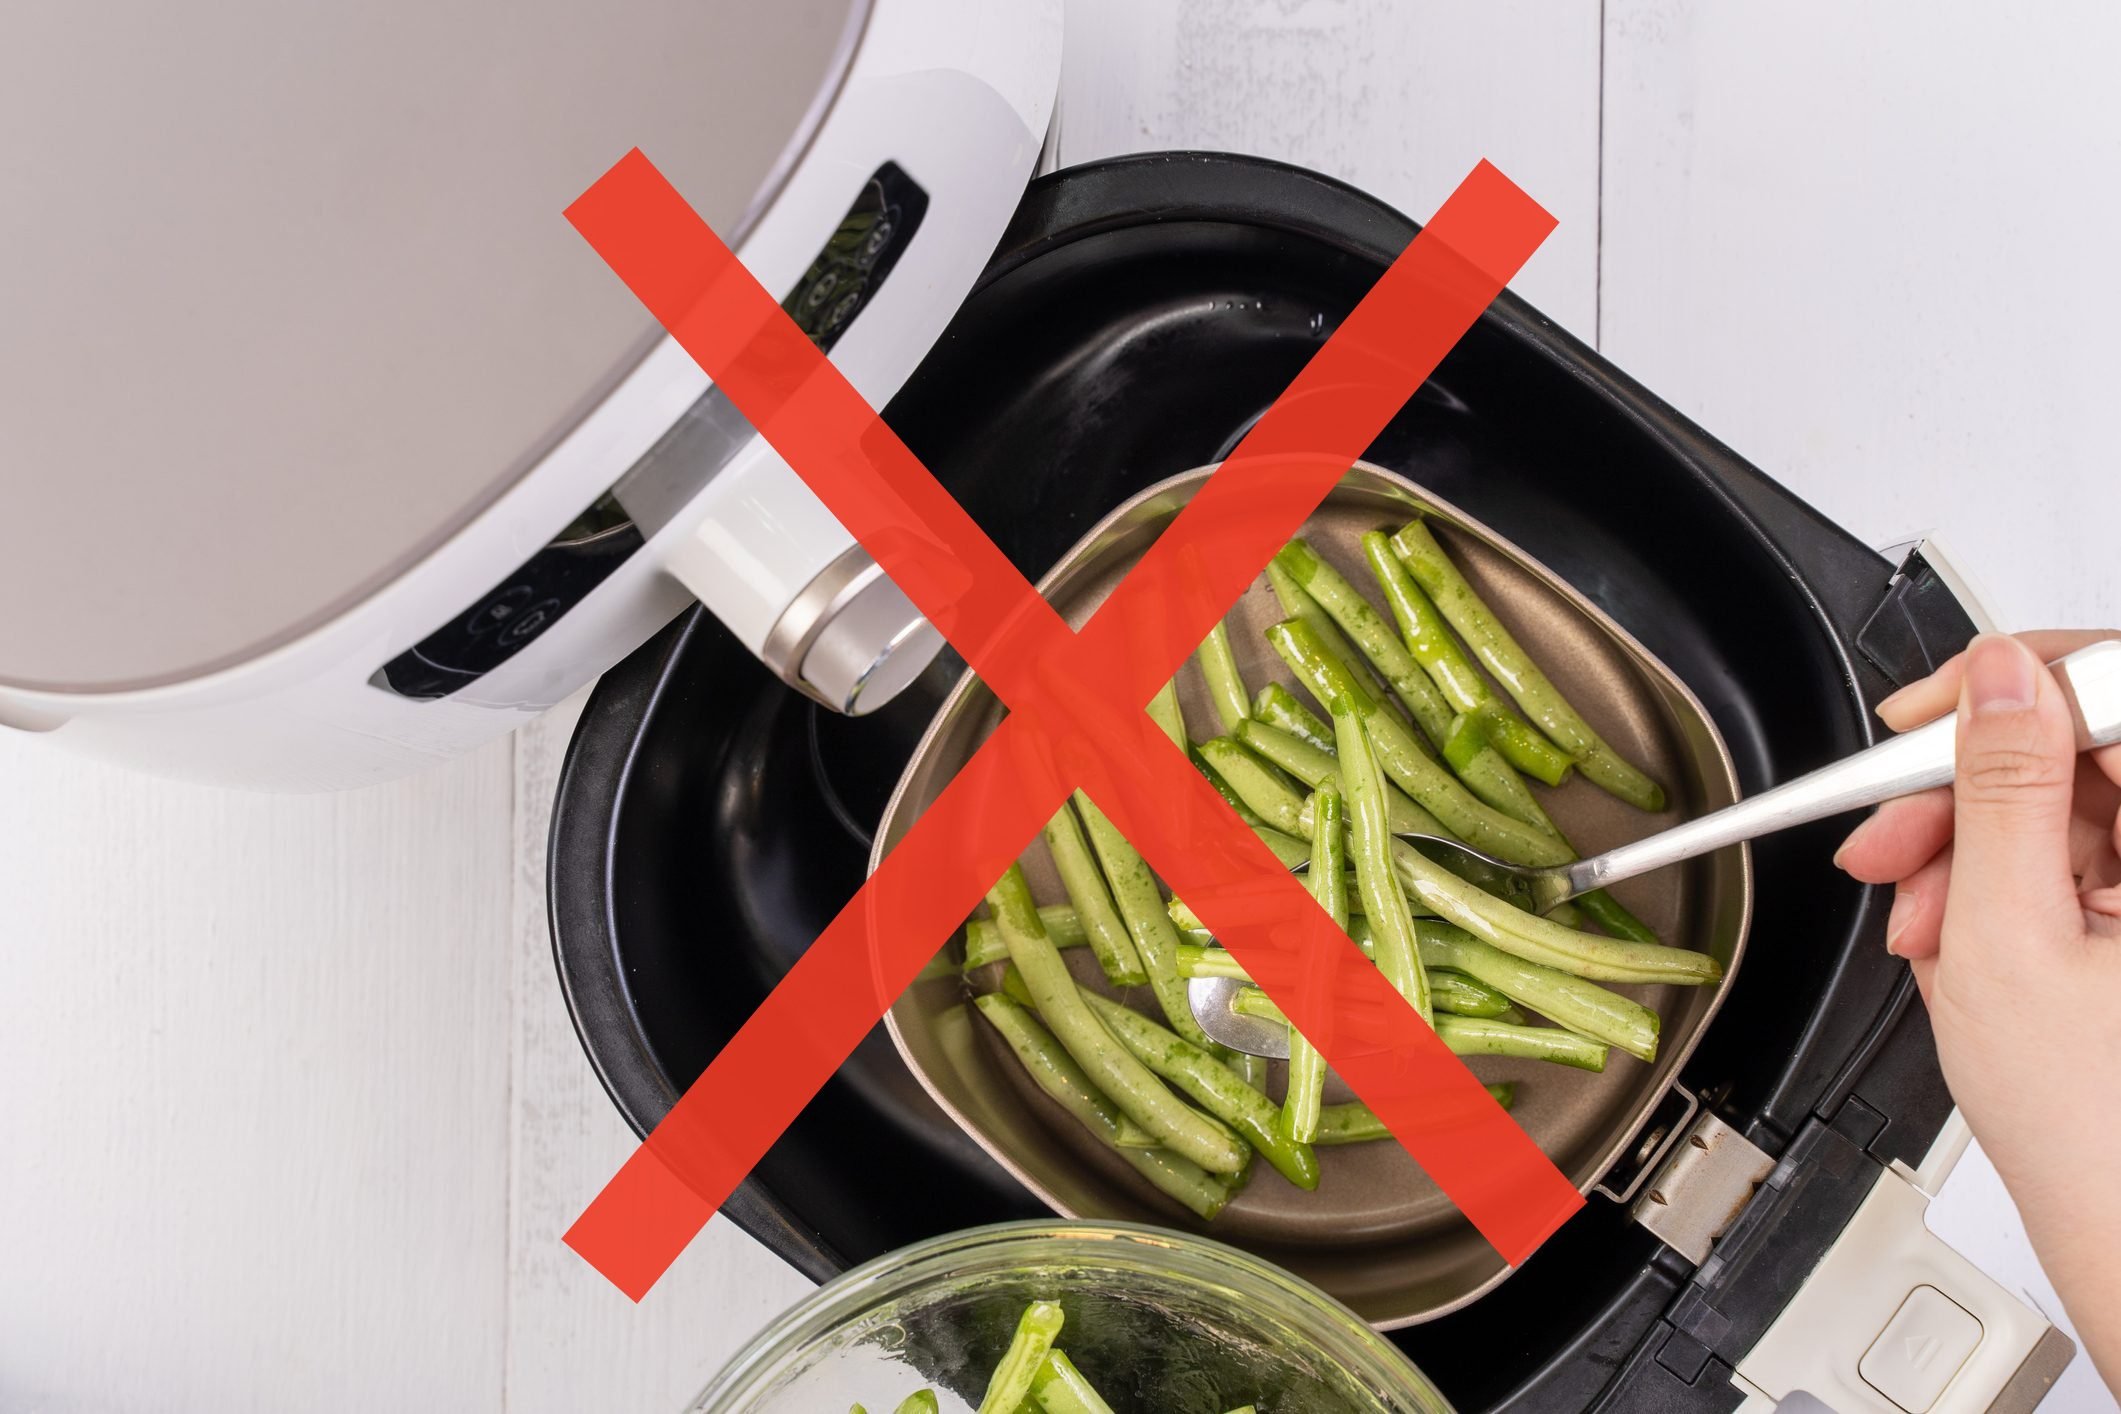 https://www.rd.com/wp-content/uploads/2021/01/Things-You-Probably-Shouldnt-Cook-in-an-Air-Fryer-GettyImages-1239713606-INSJOY.jpg?fit=700%2C1024